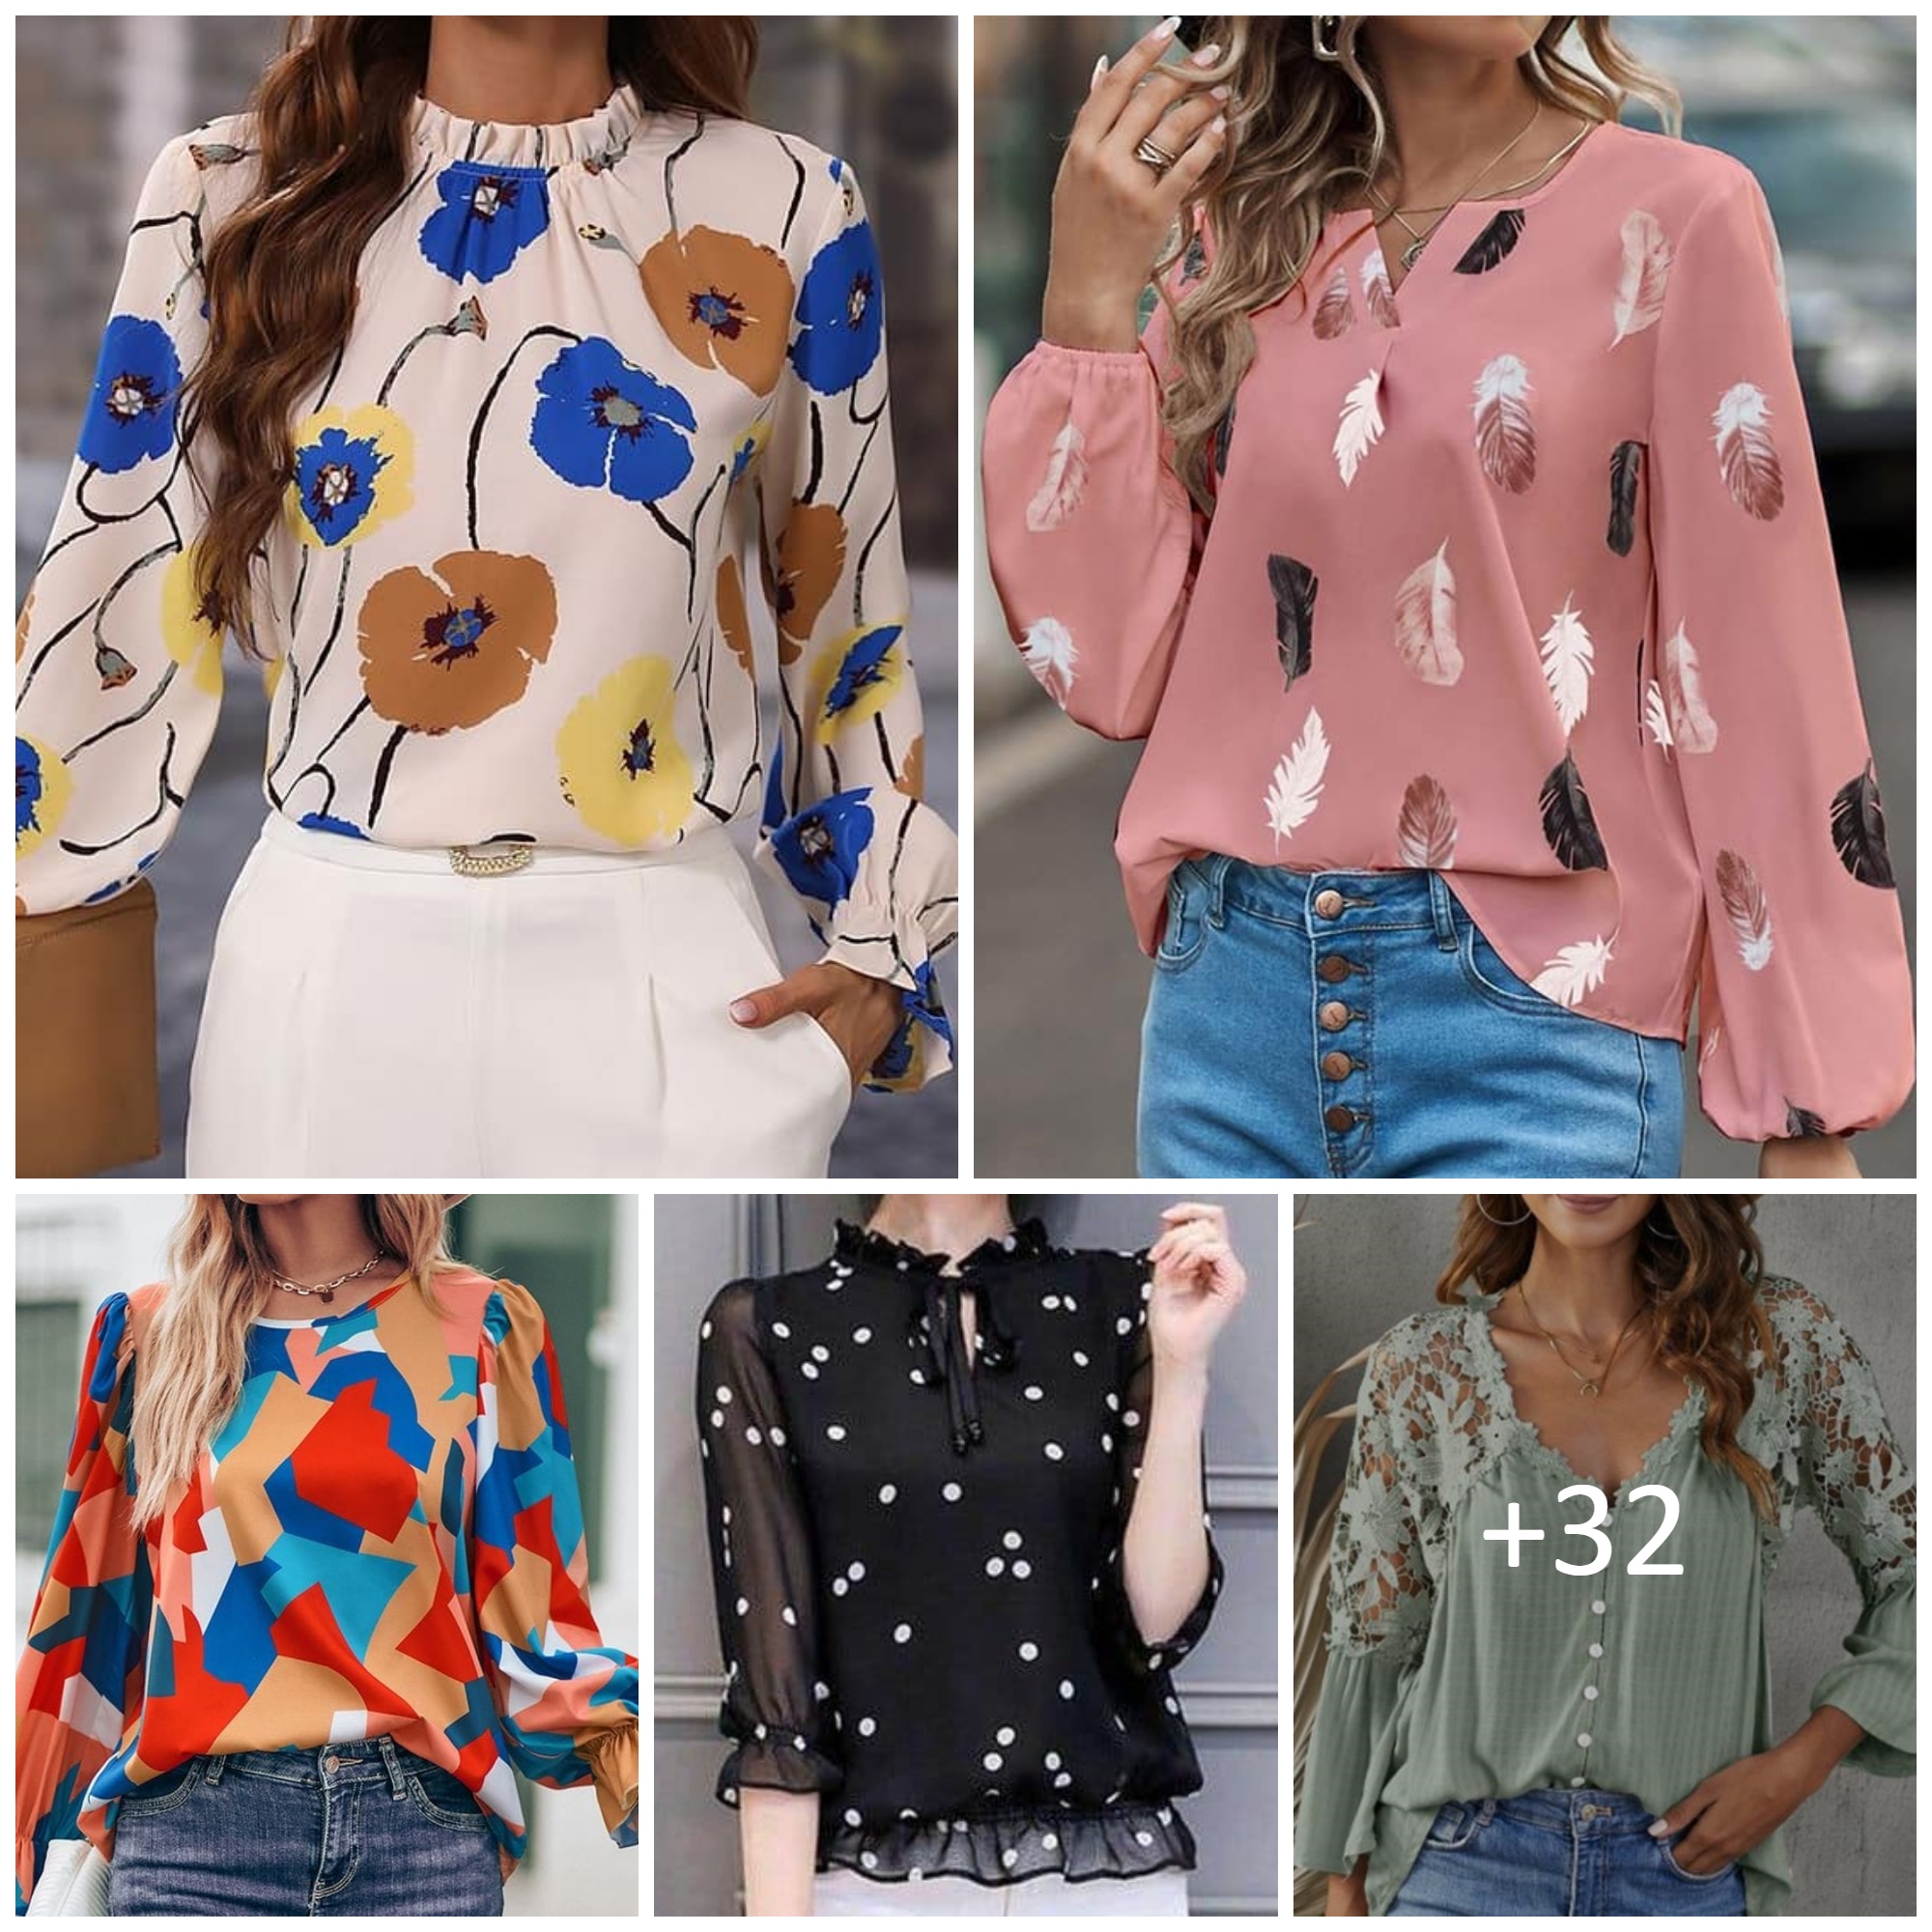 TOP NOTCH FASHION WITH LADIES’ TOPS